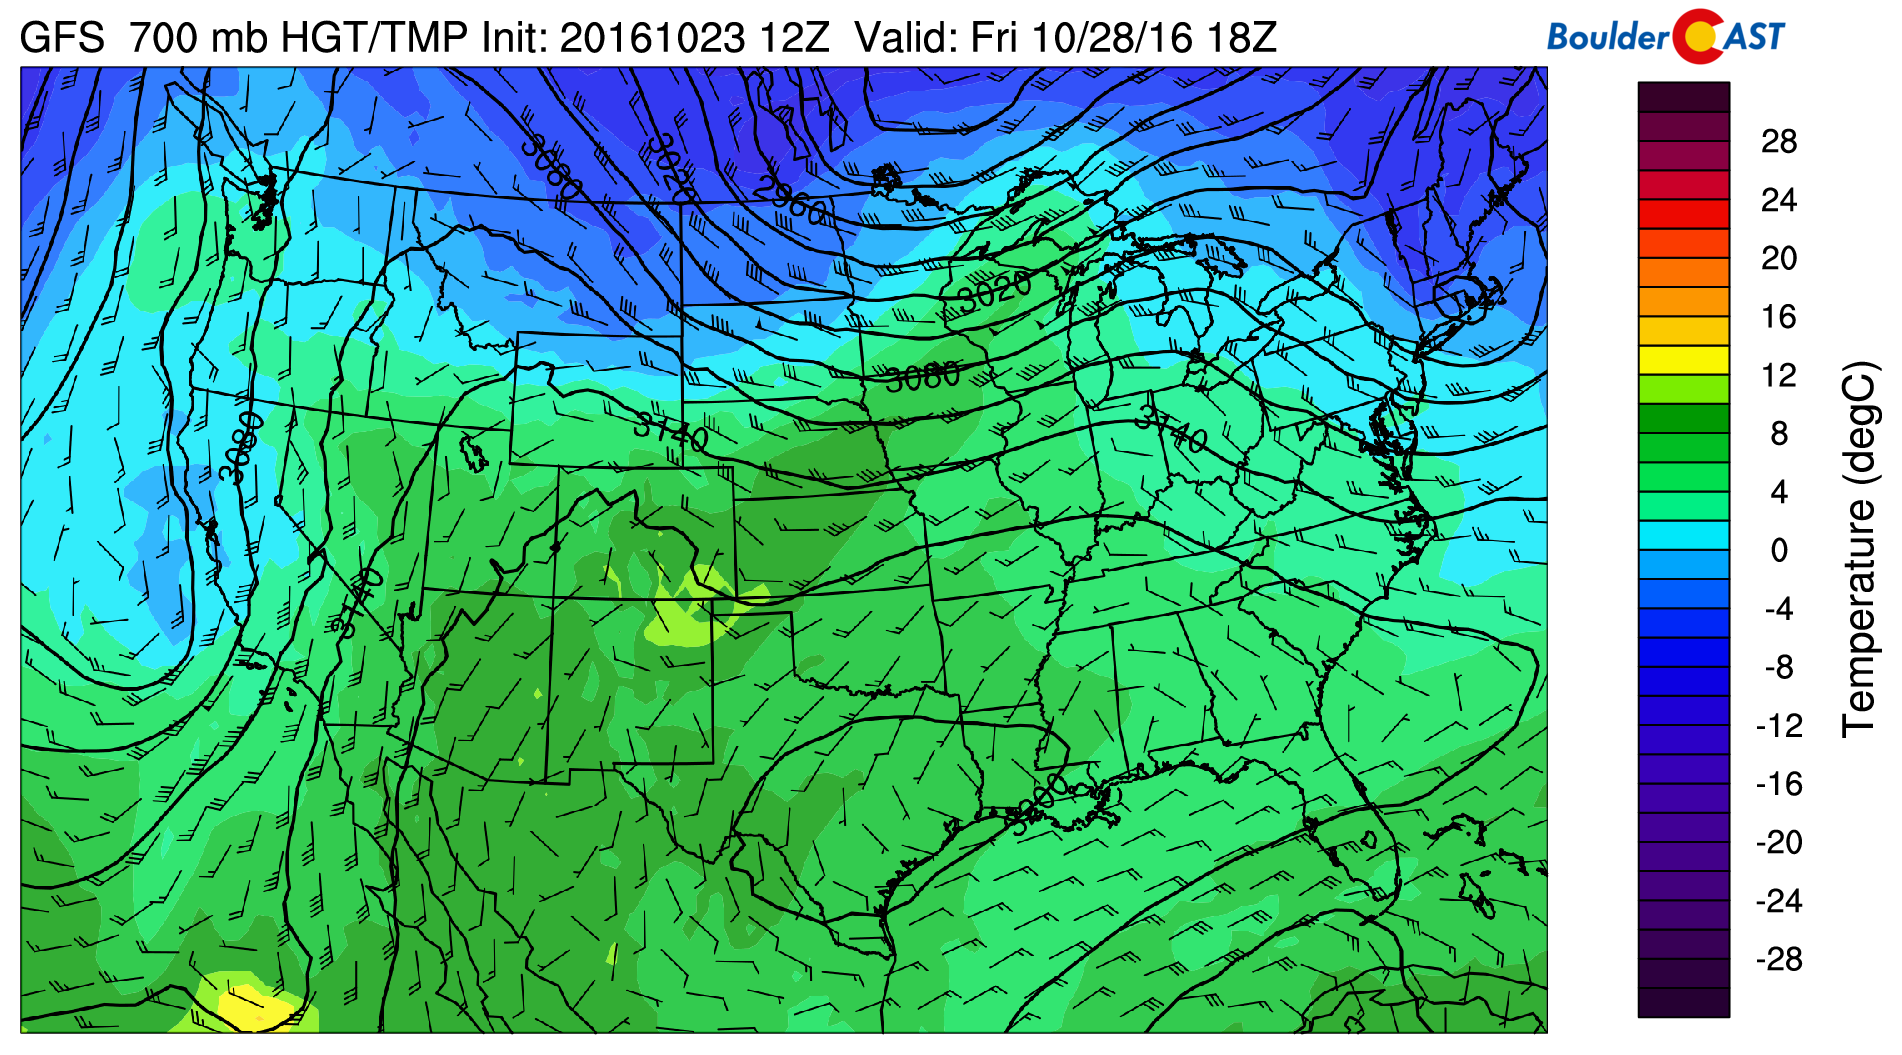 GFS 700 mb temperature pattern on Friday